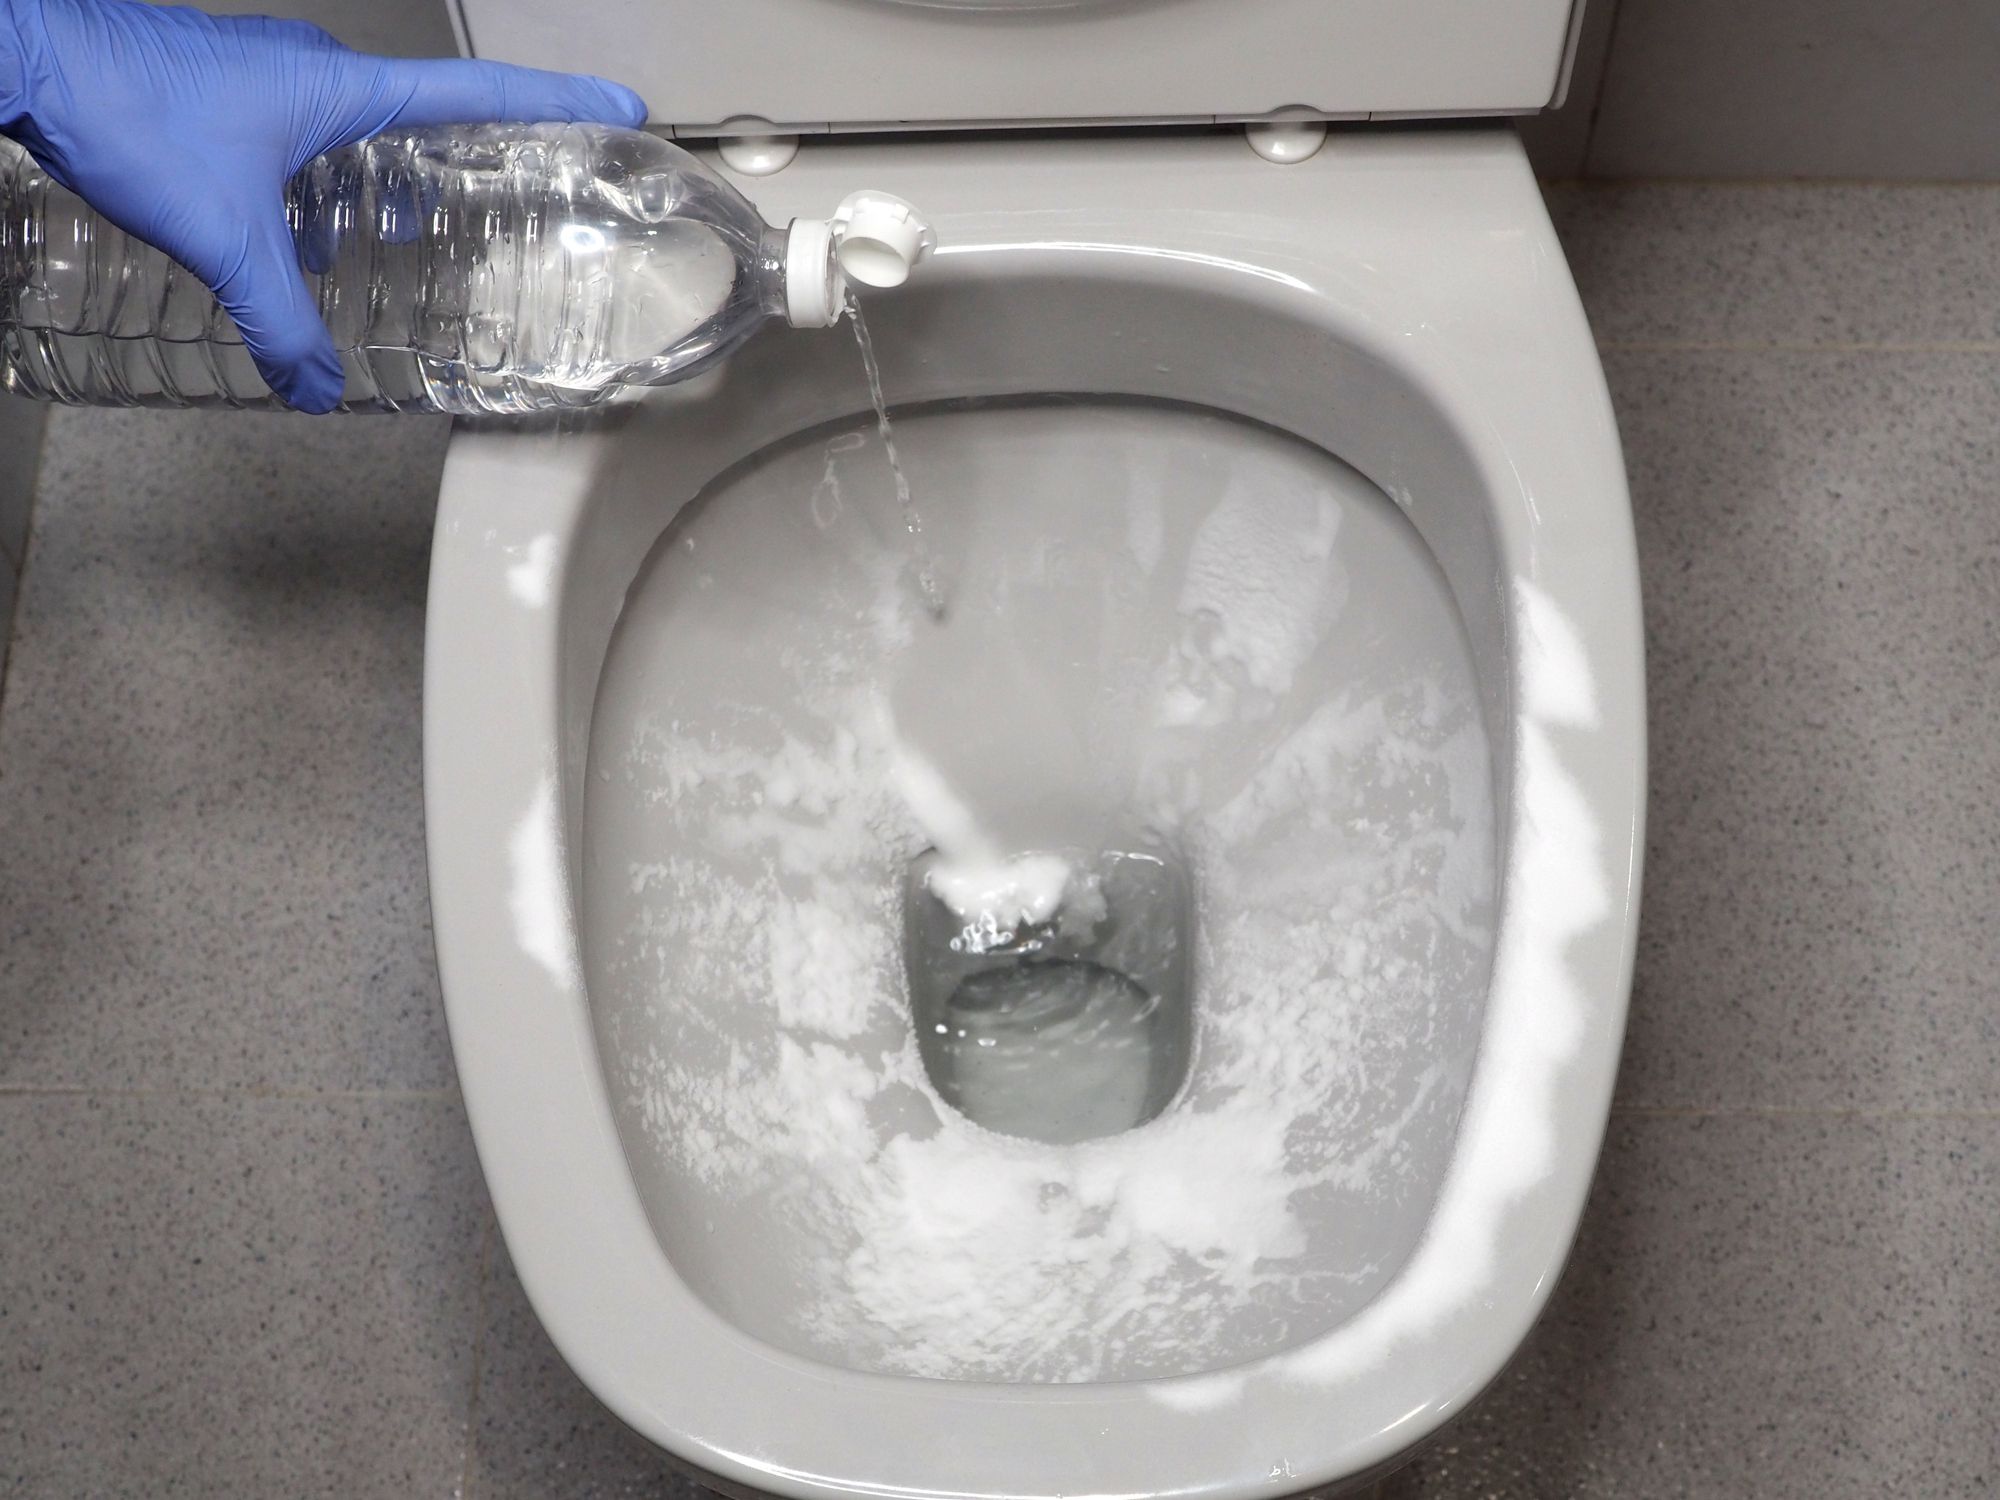 How To Clean A Toilet (Tutorial For Cleaning A Bathroom) 